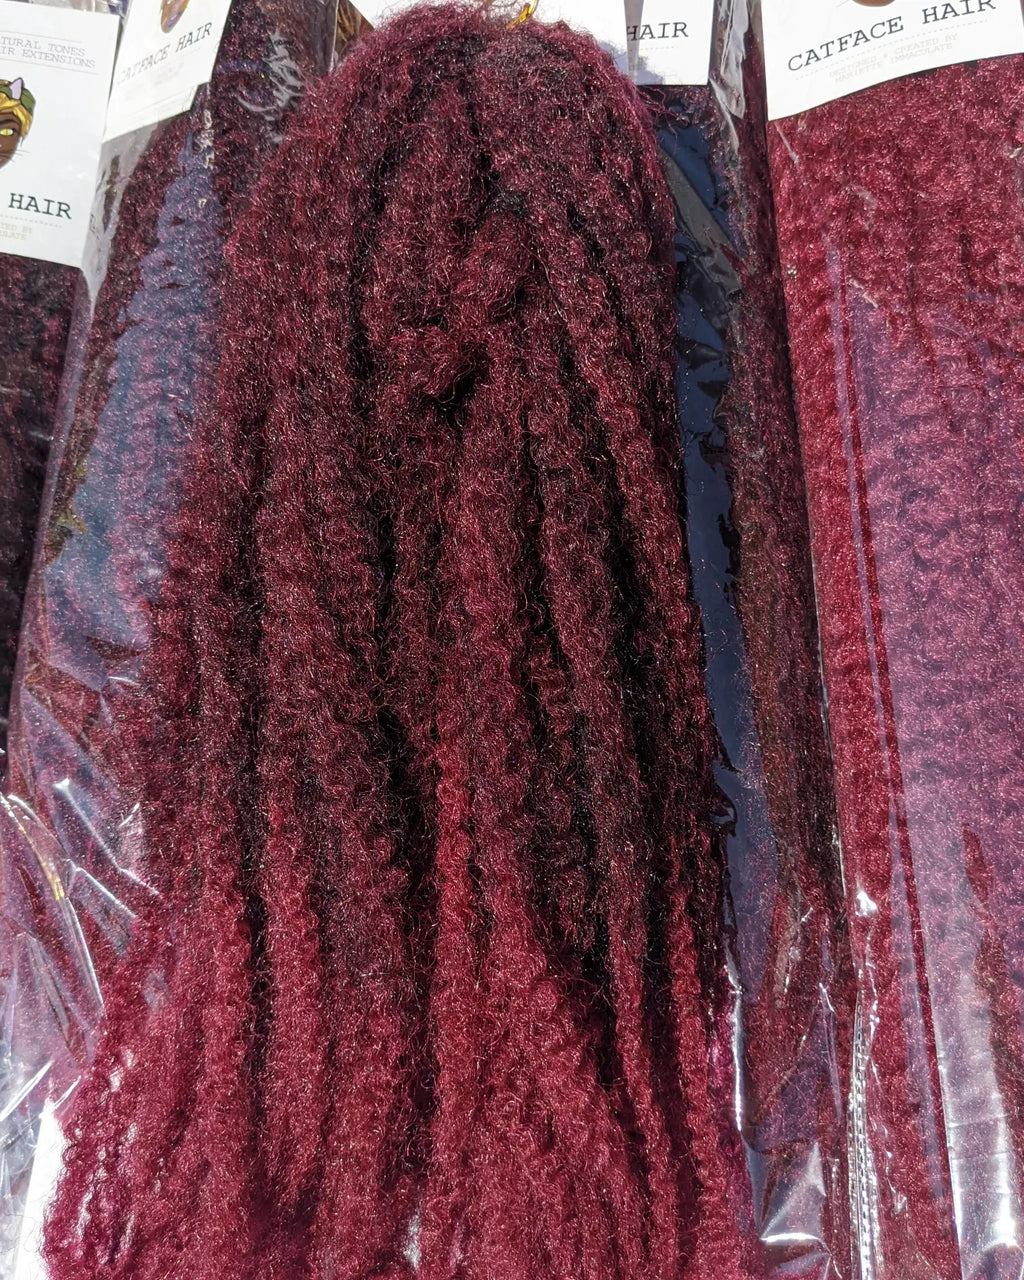 CATFACE MARLEY BRAID HAIR - BROWN AND BURGUNDY OMBRE | CROCHET BRAIDS | FAUX LOCS.